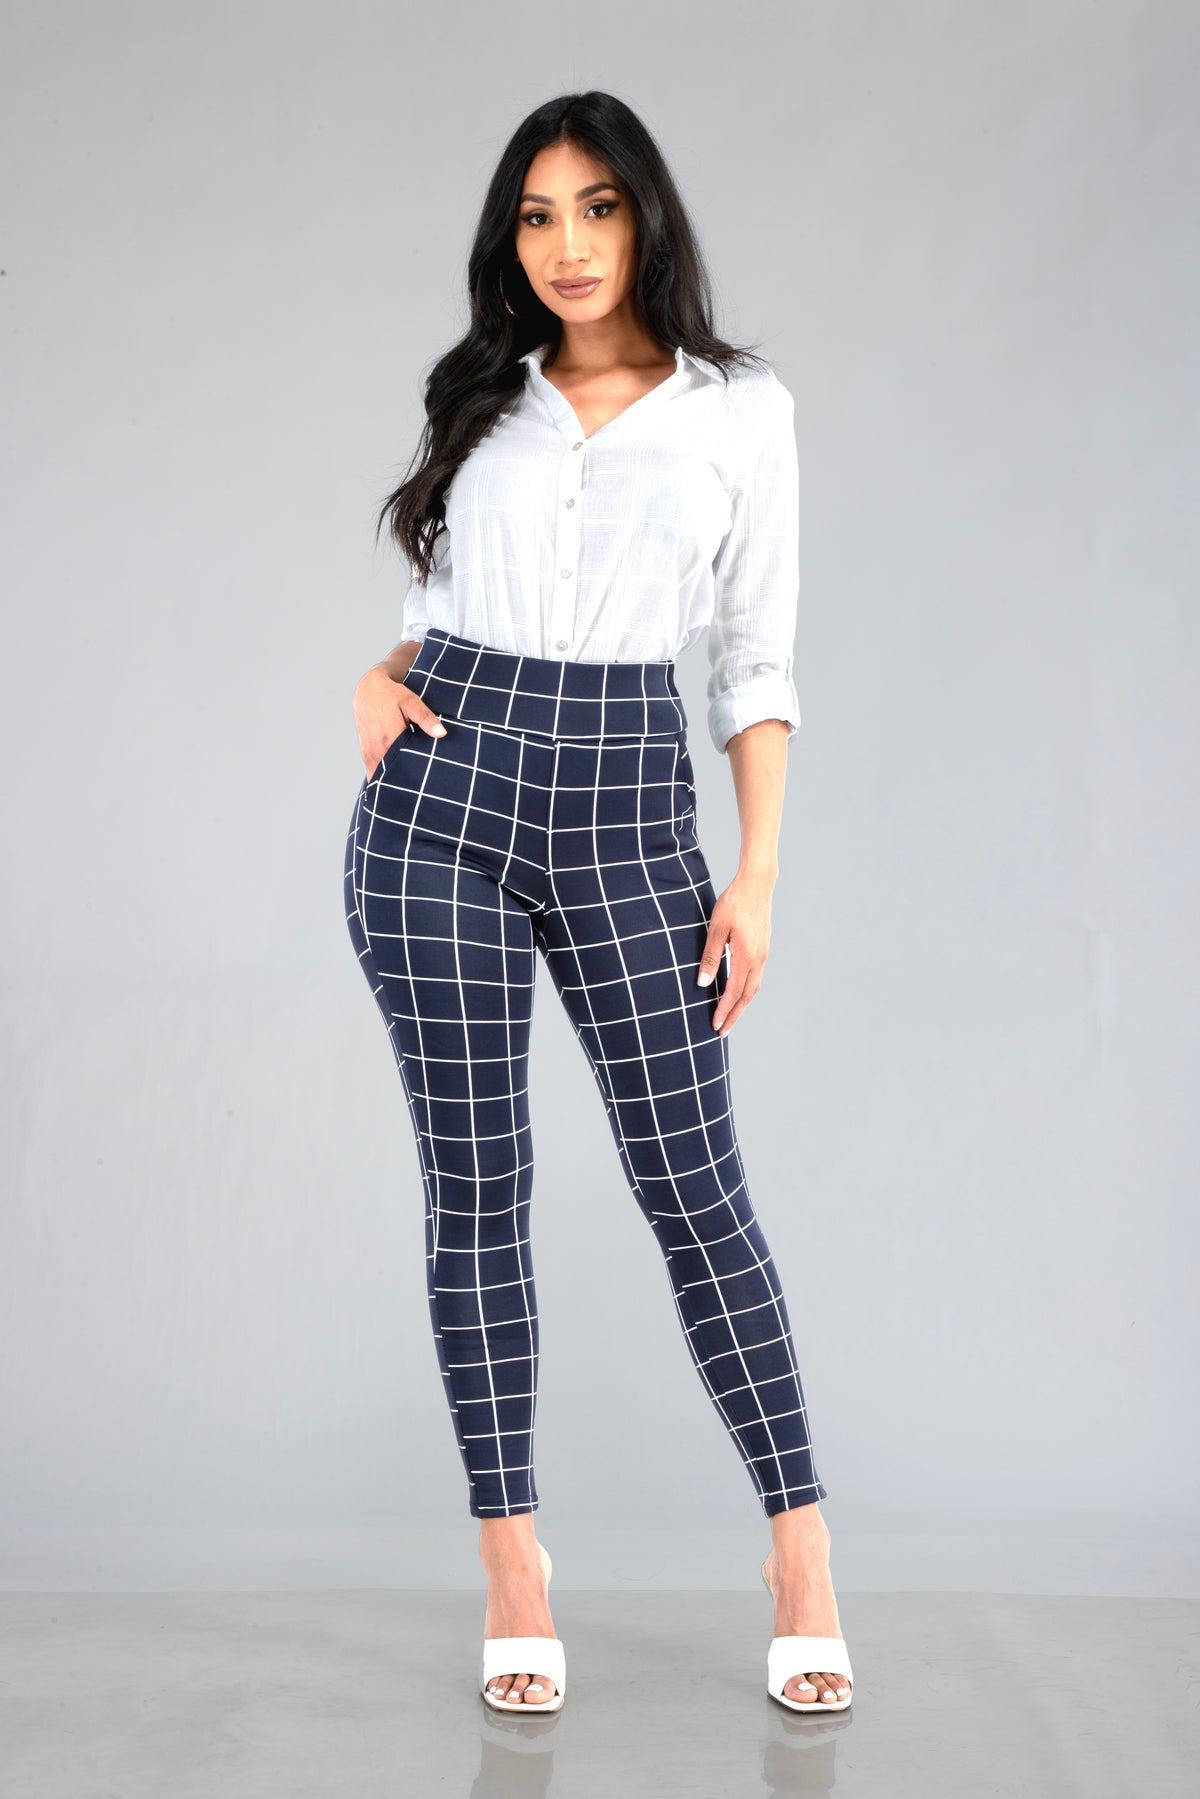 High Waist Sculpting Treggings With Front Pockets - Navy & White Plaid